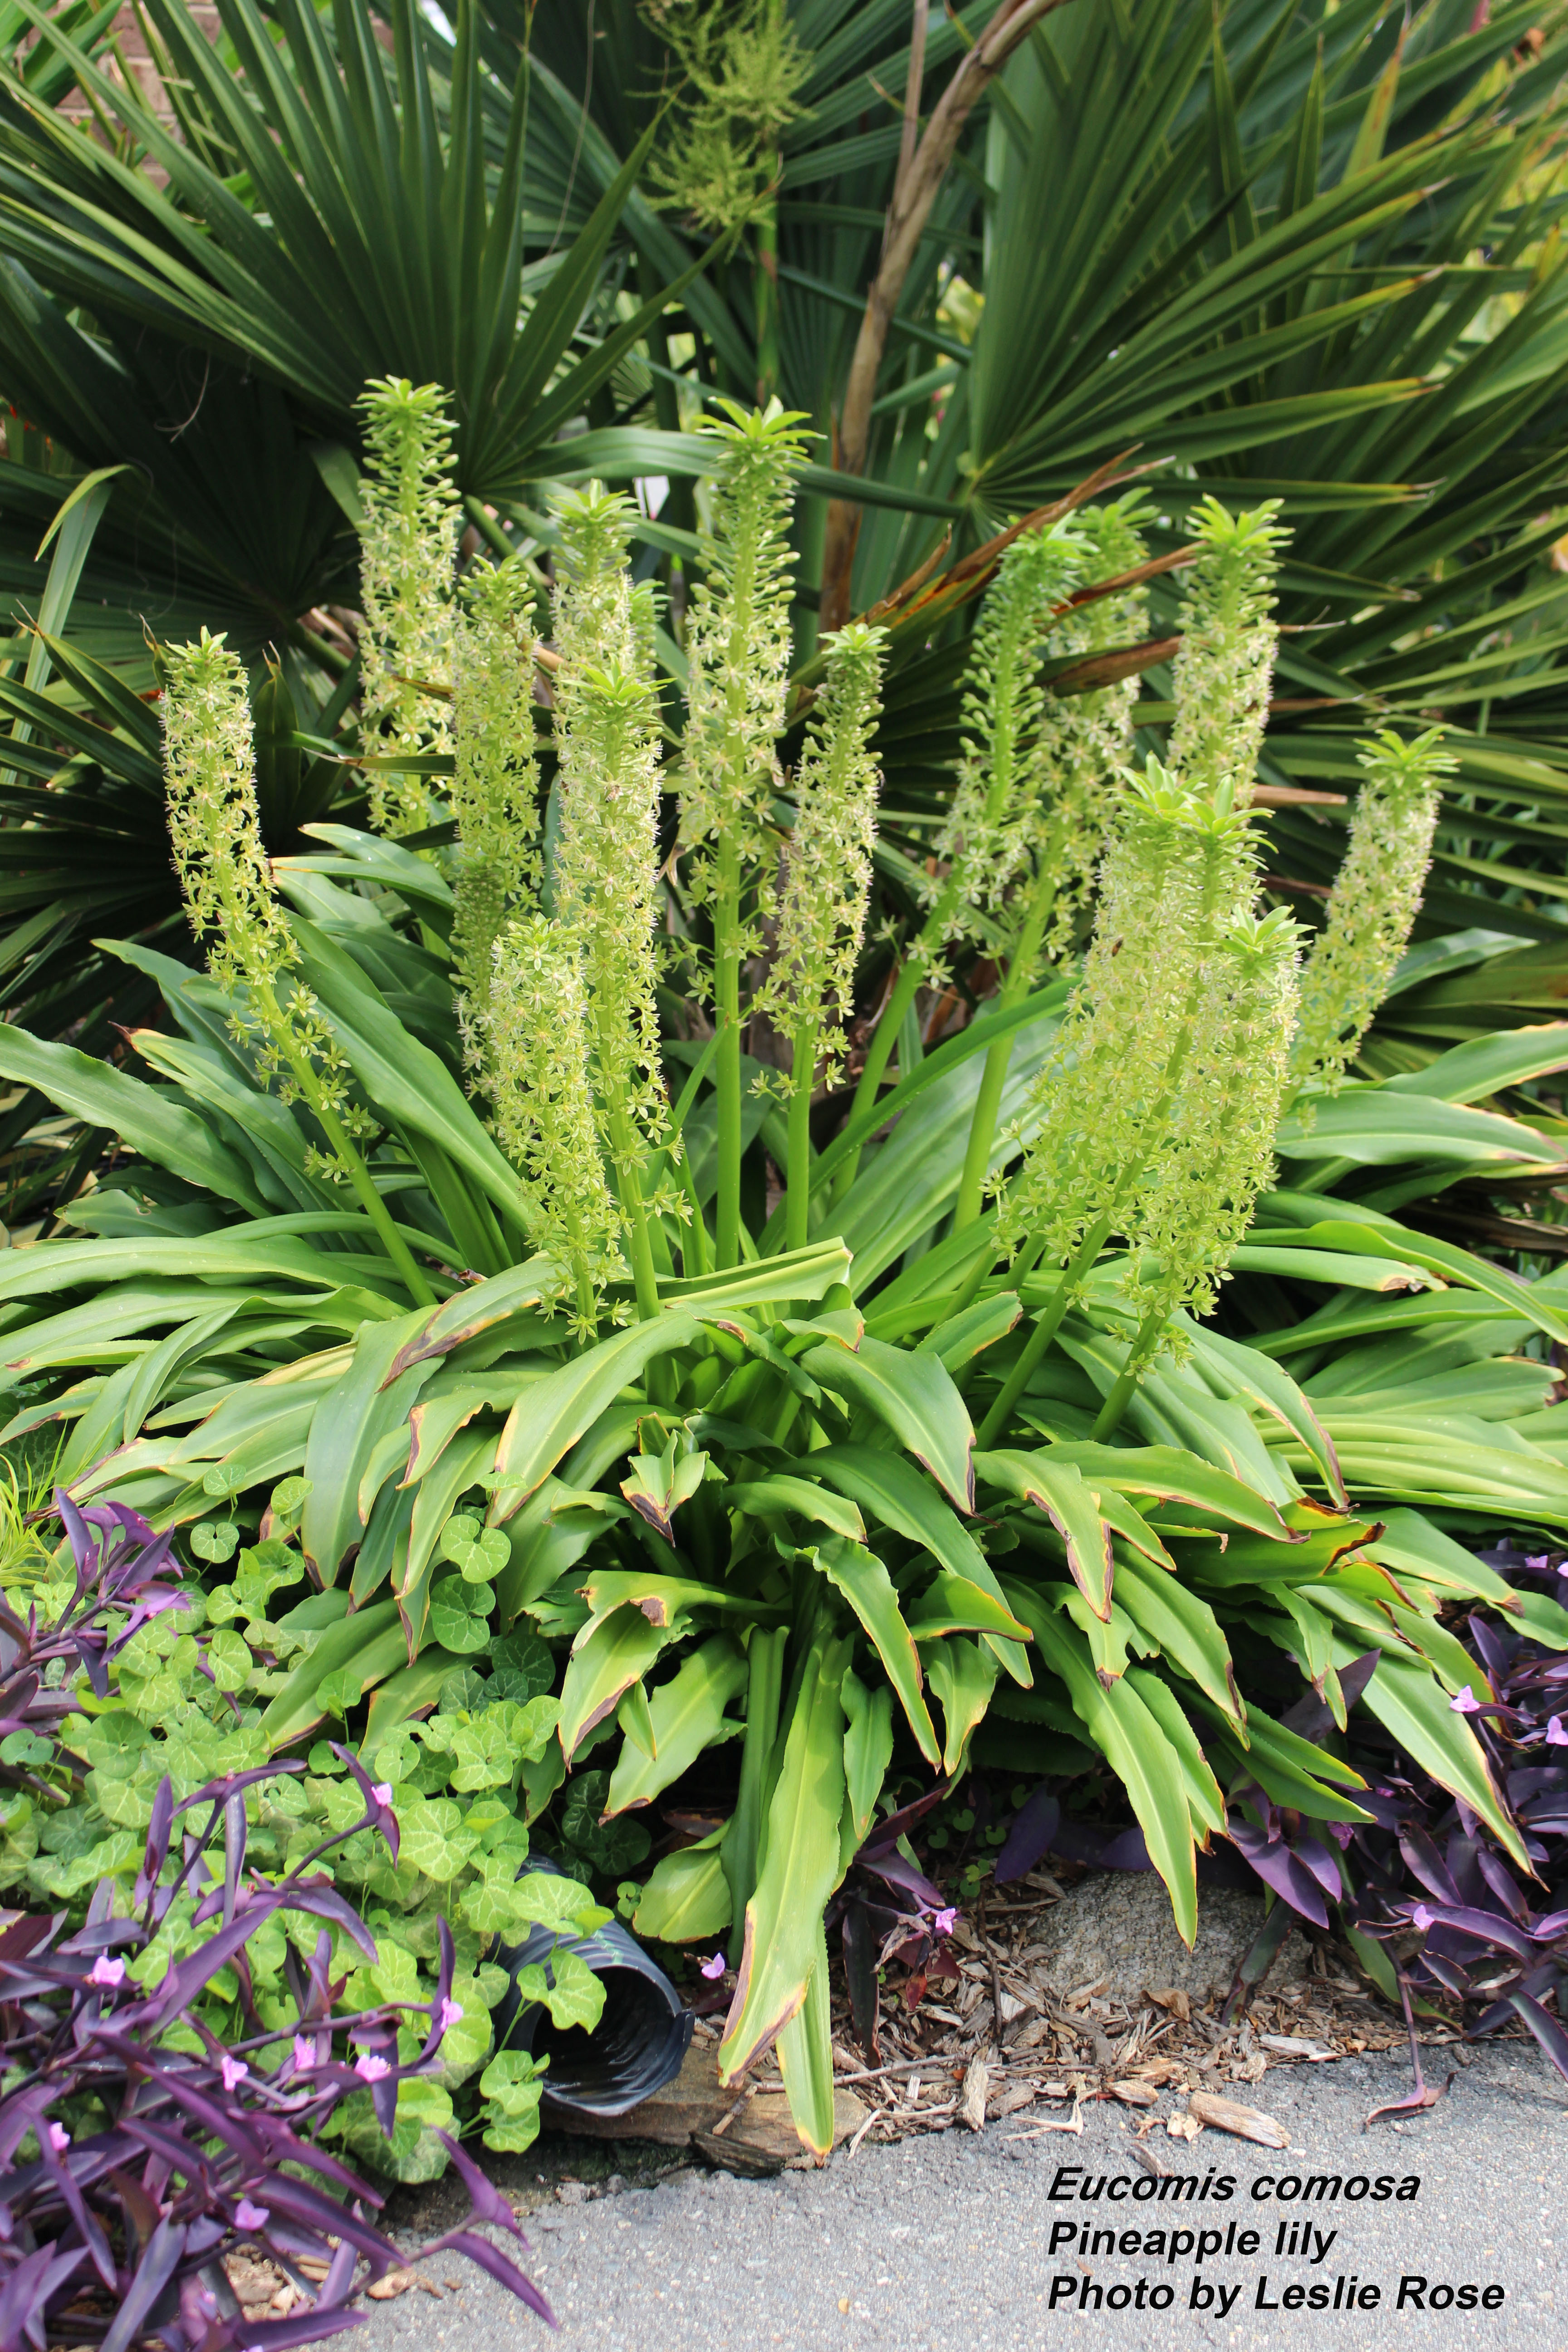 Pineapple lily